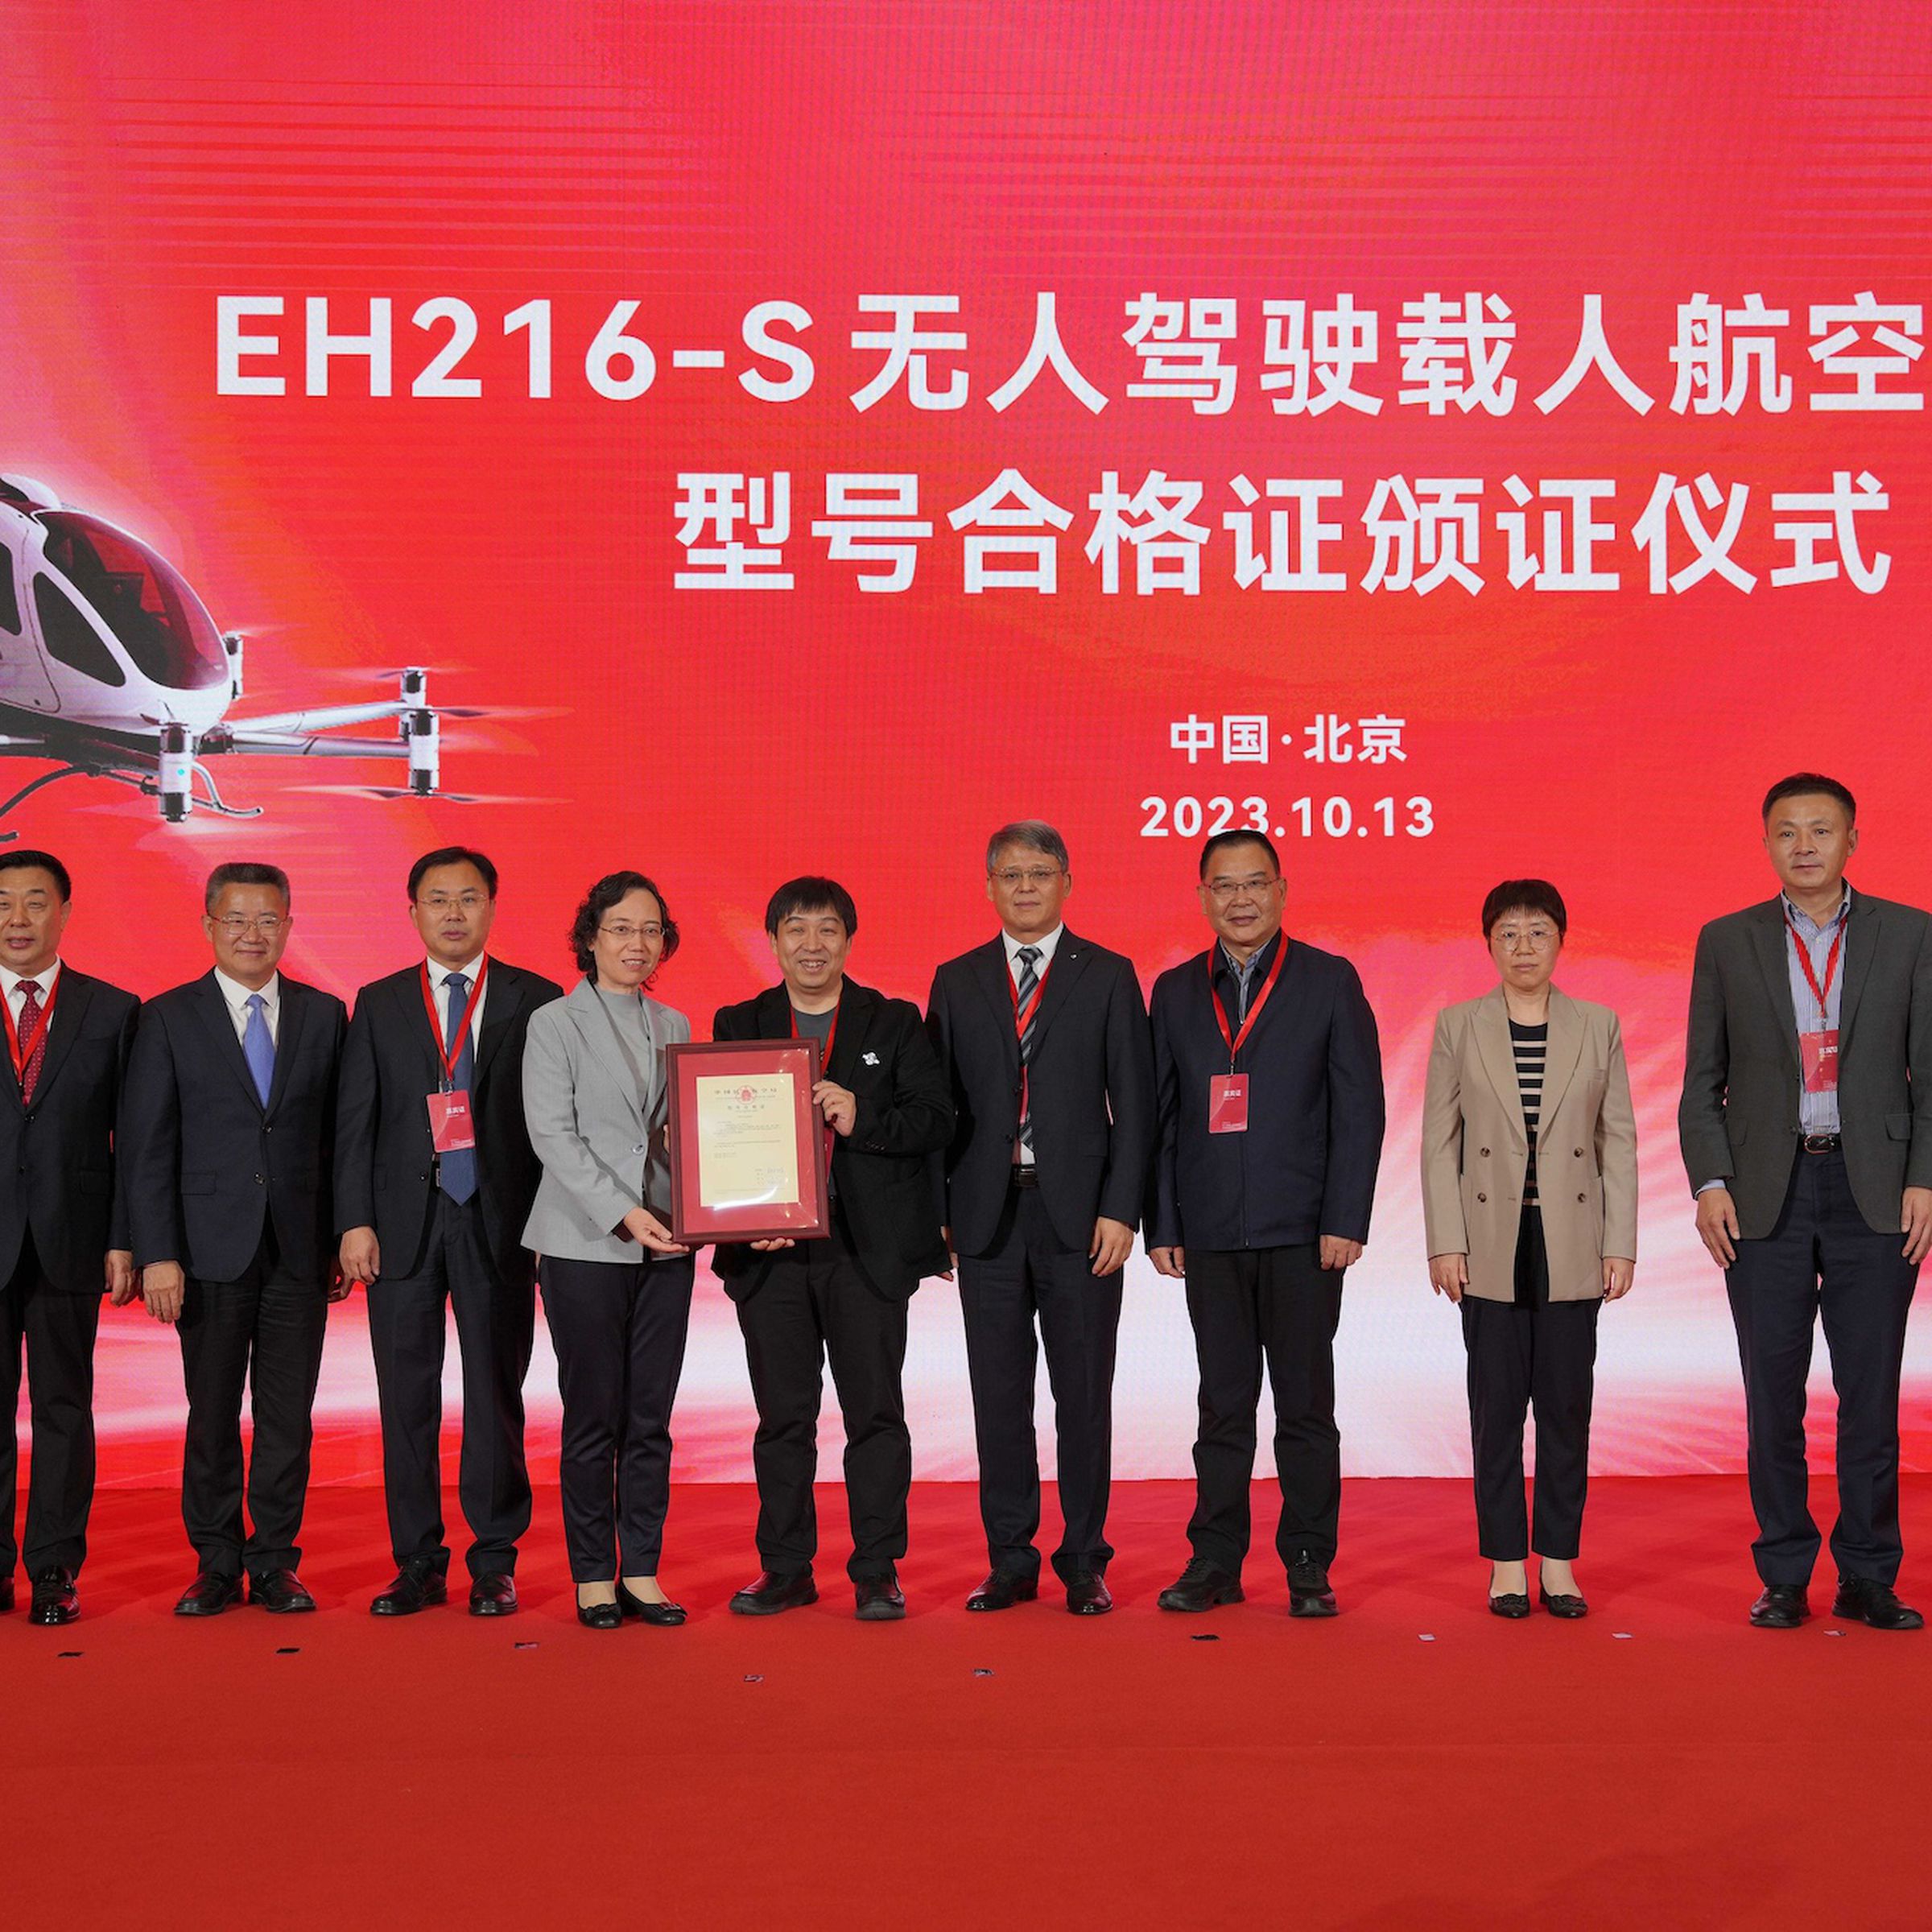 A picture of EHang Holdings executives lined up in a row in front of a red backdrop holding the new certification.